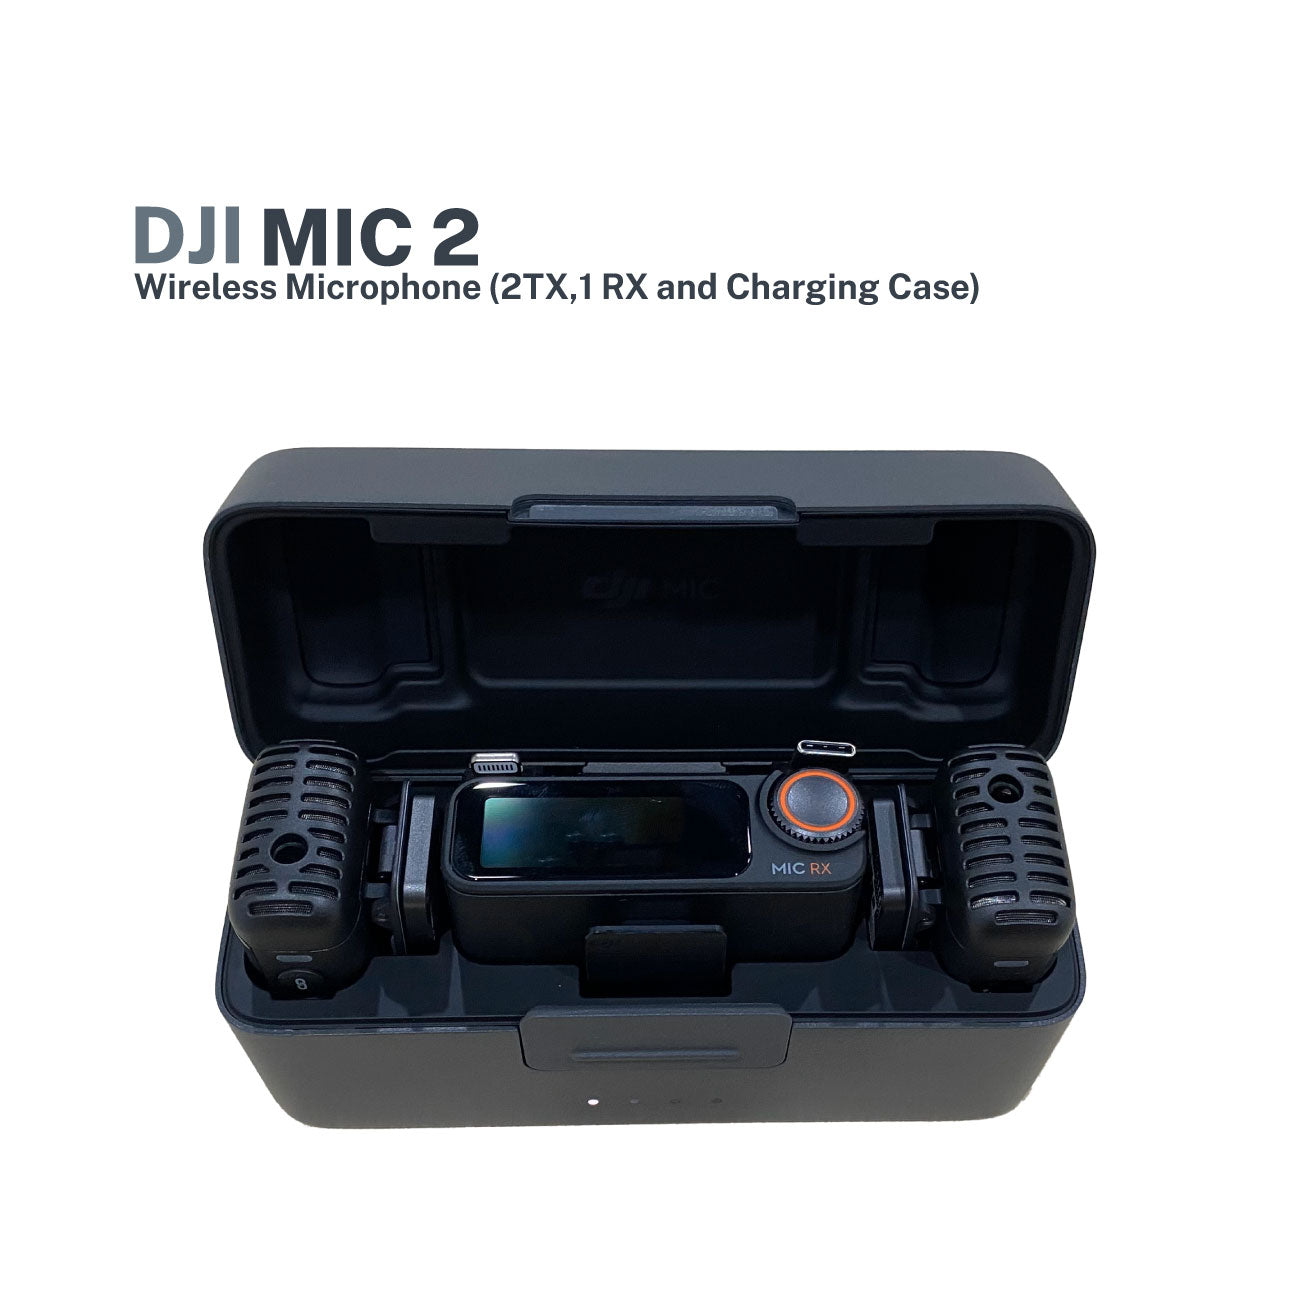 DJI Mic may be available to buy now, but it's not ready to ship - DroneDJ